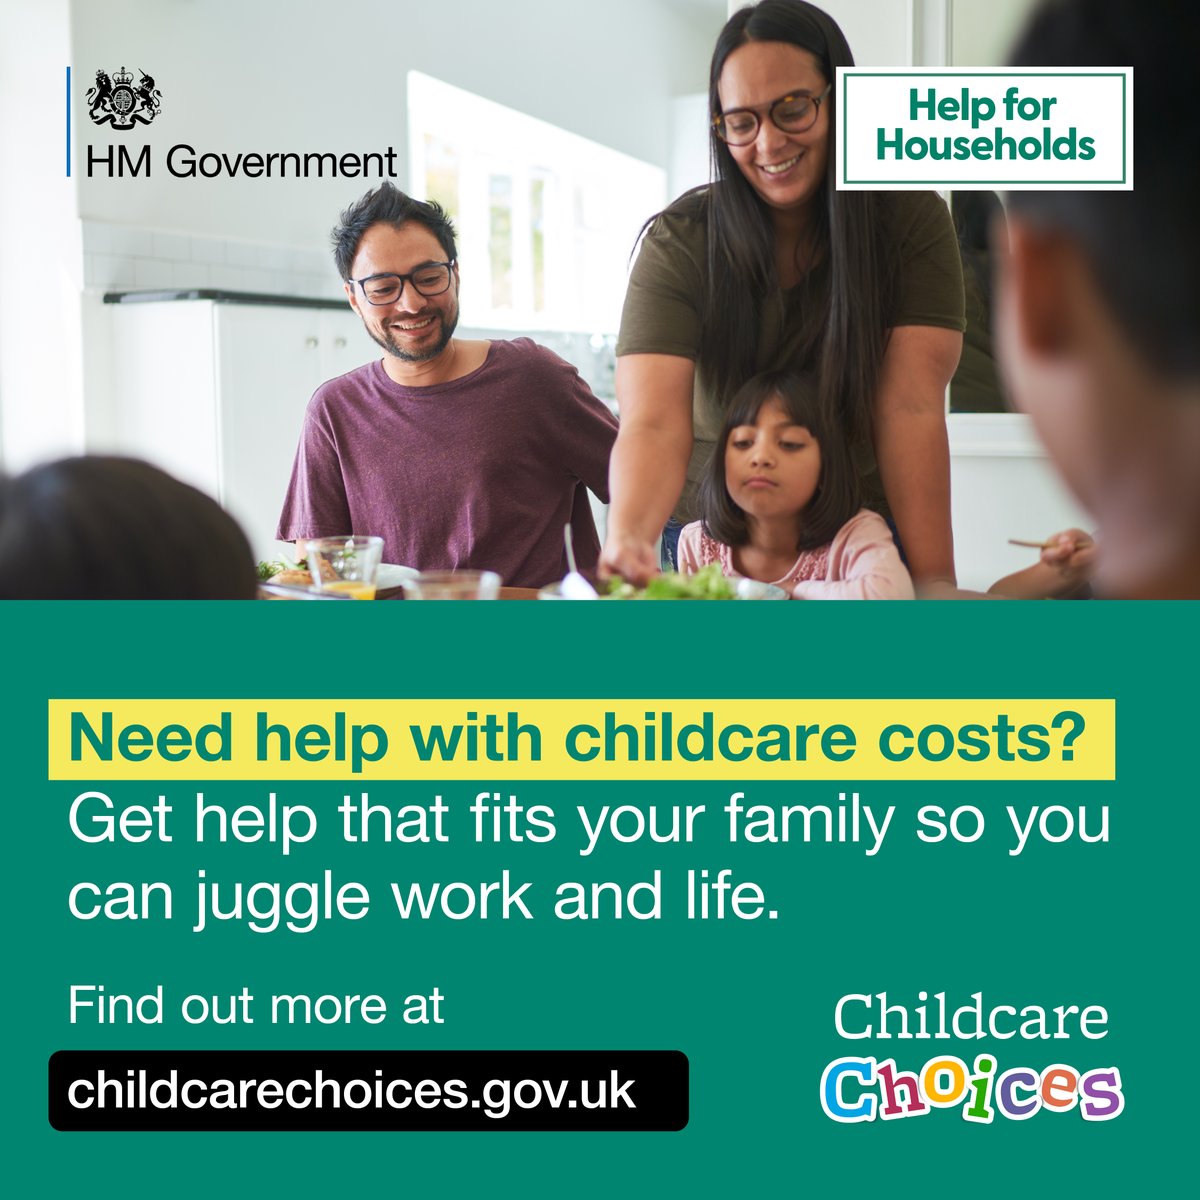 Are you a working parent? You could get help with up to 85% of your childcare costs with Universal Credit - Eligibility criteria apply Find out more at: ow.ly/JrkW50PwzgI